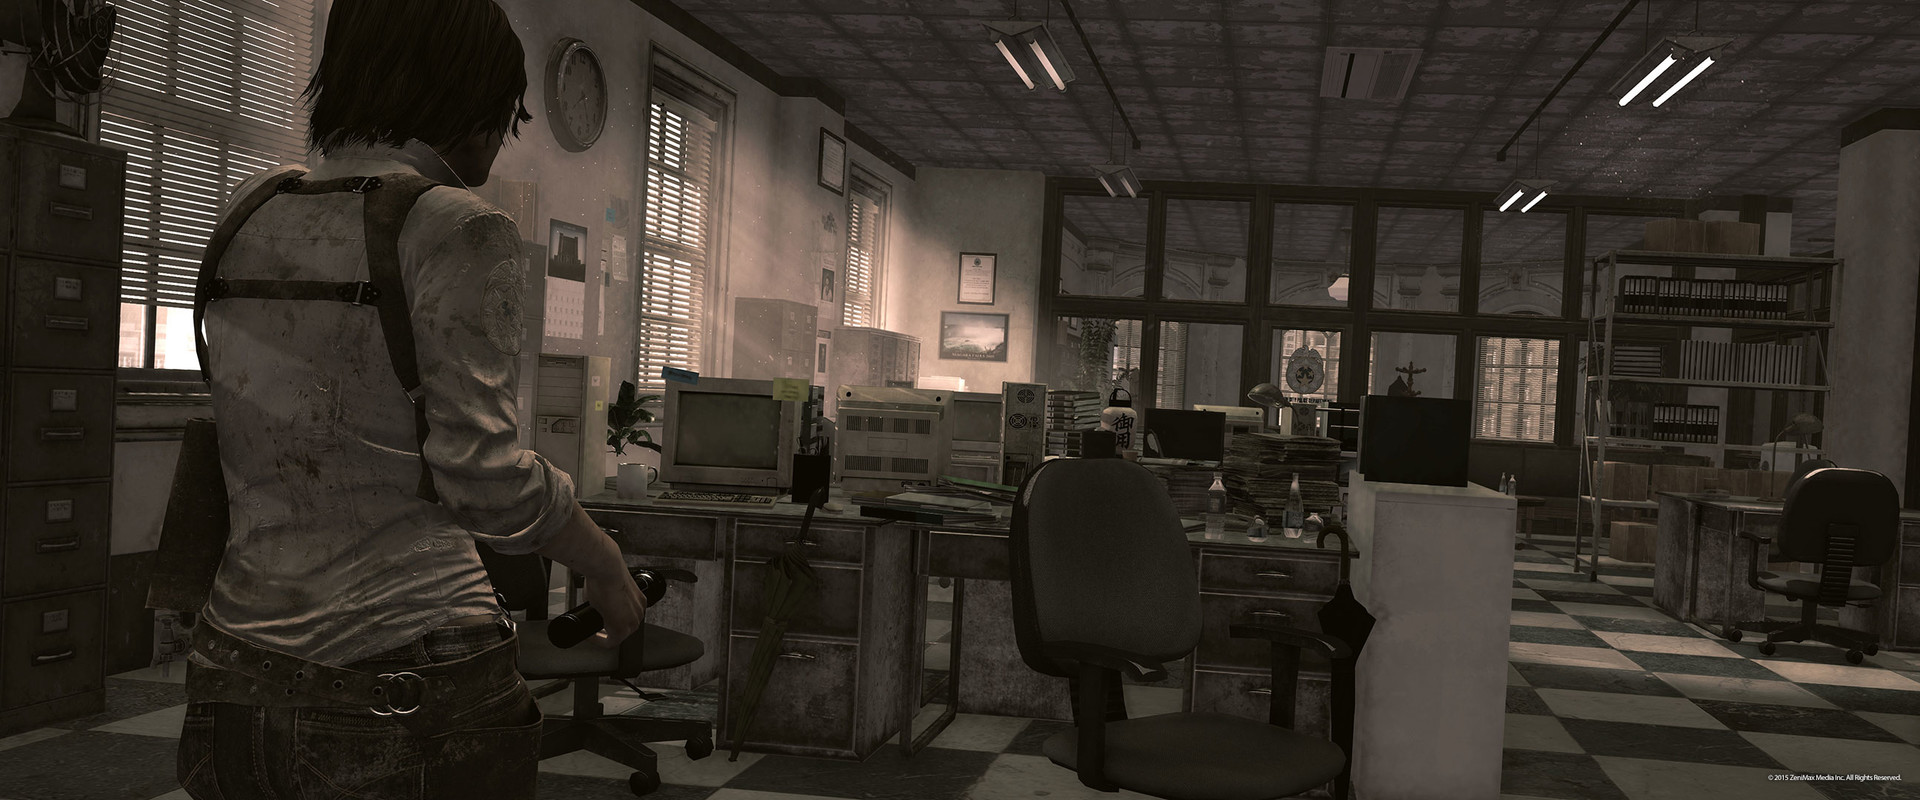 The Evil Within - The Consequence Featured Screenshot #1